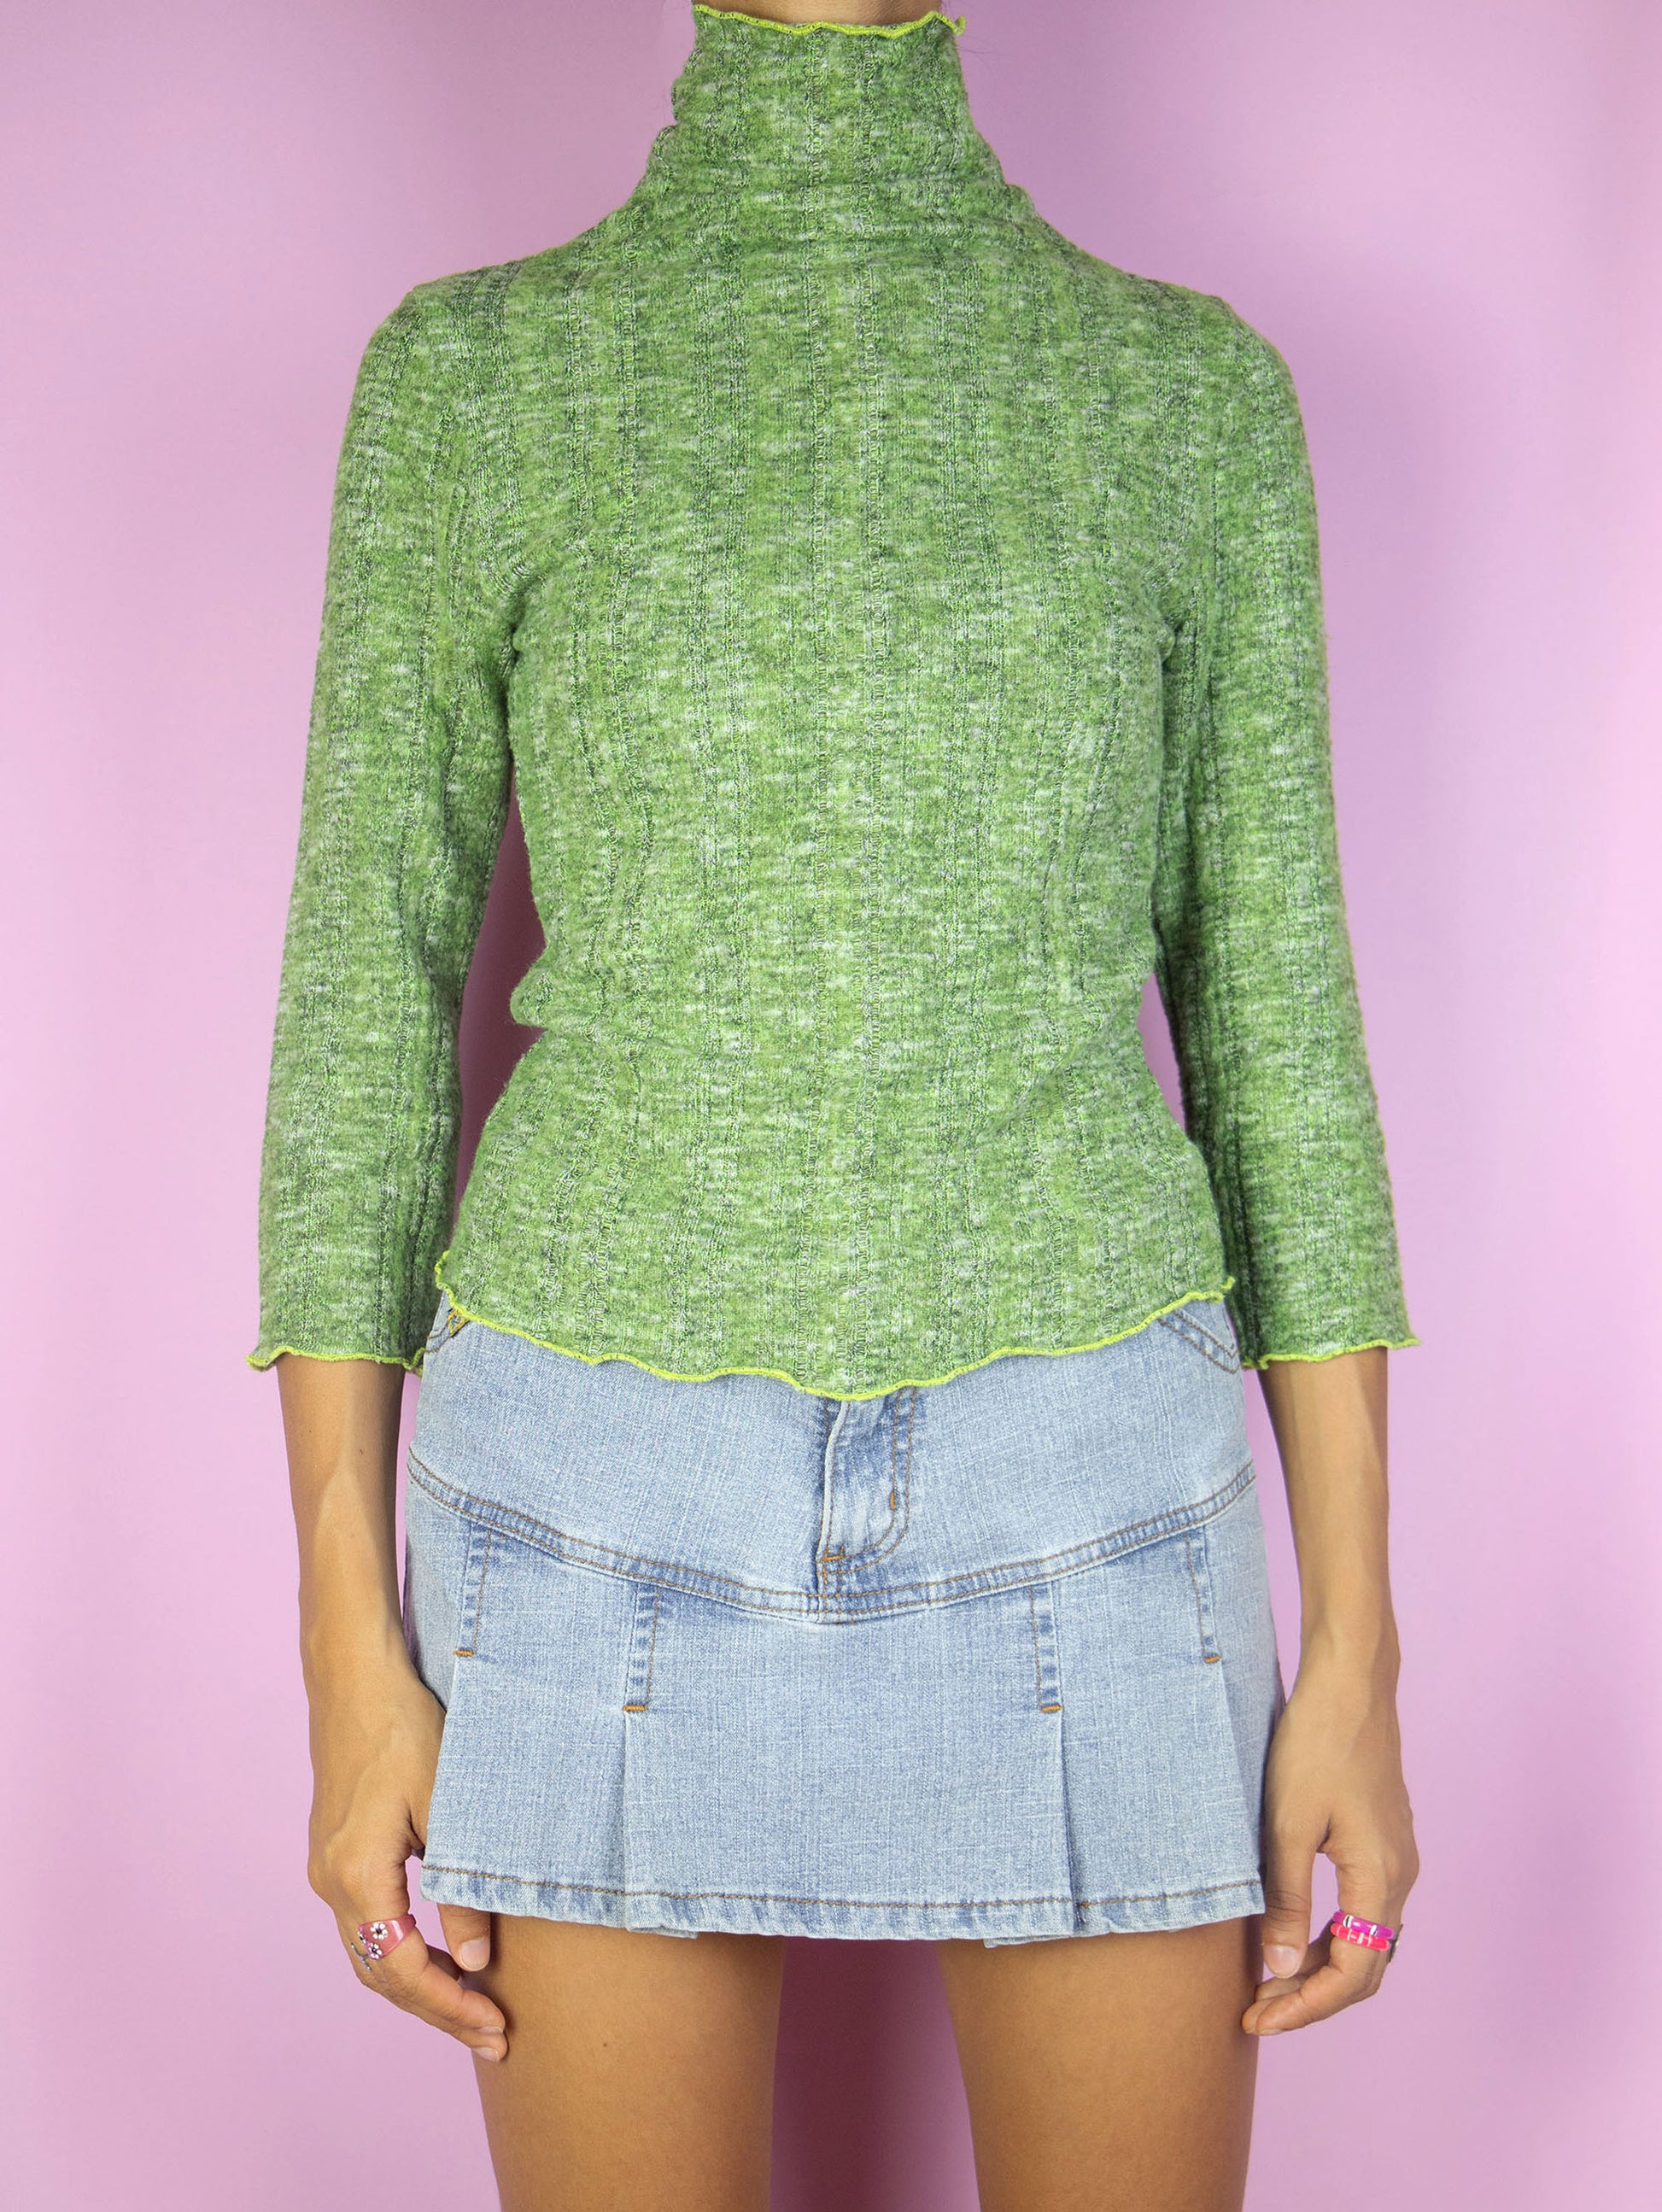 The Y2K Green Turtleneck Top is a vintage 2000s lightweight ribbed knit sweater with three-quarter sleeves.